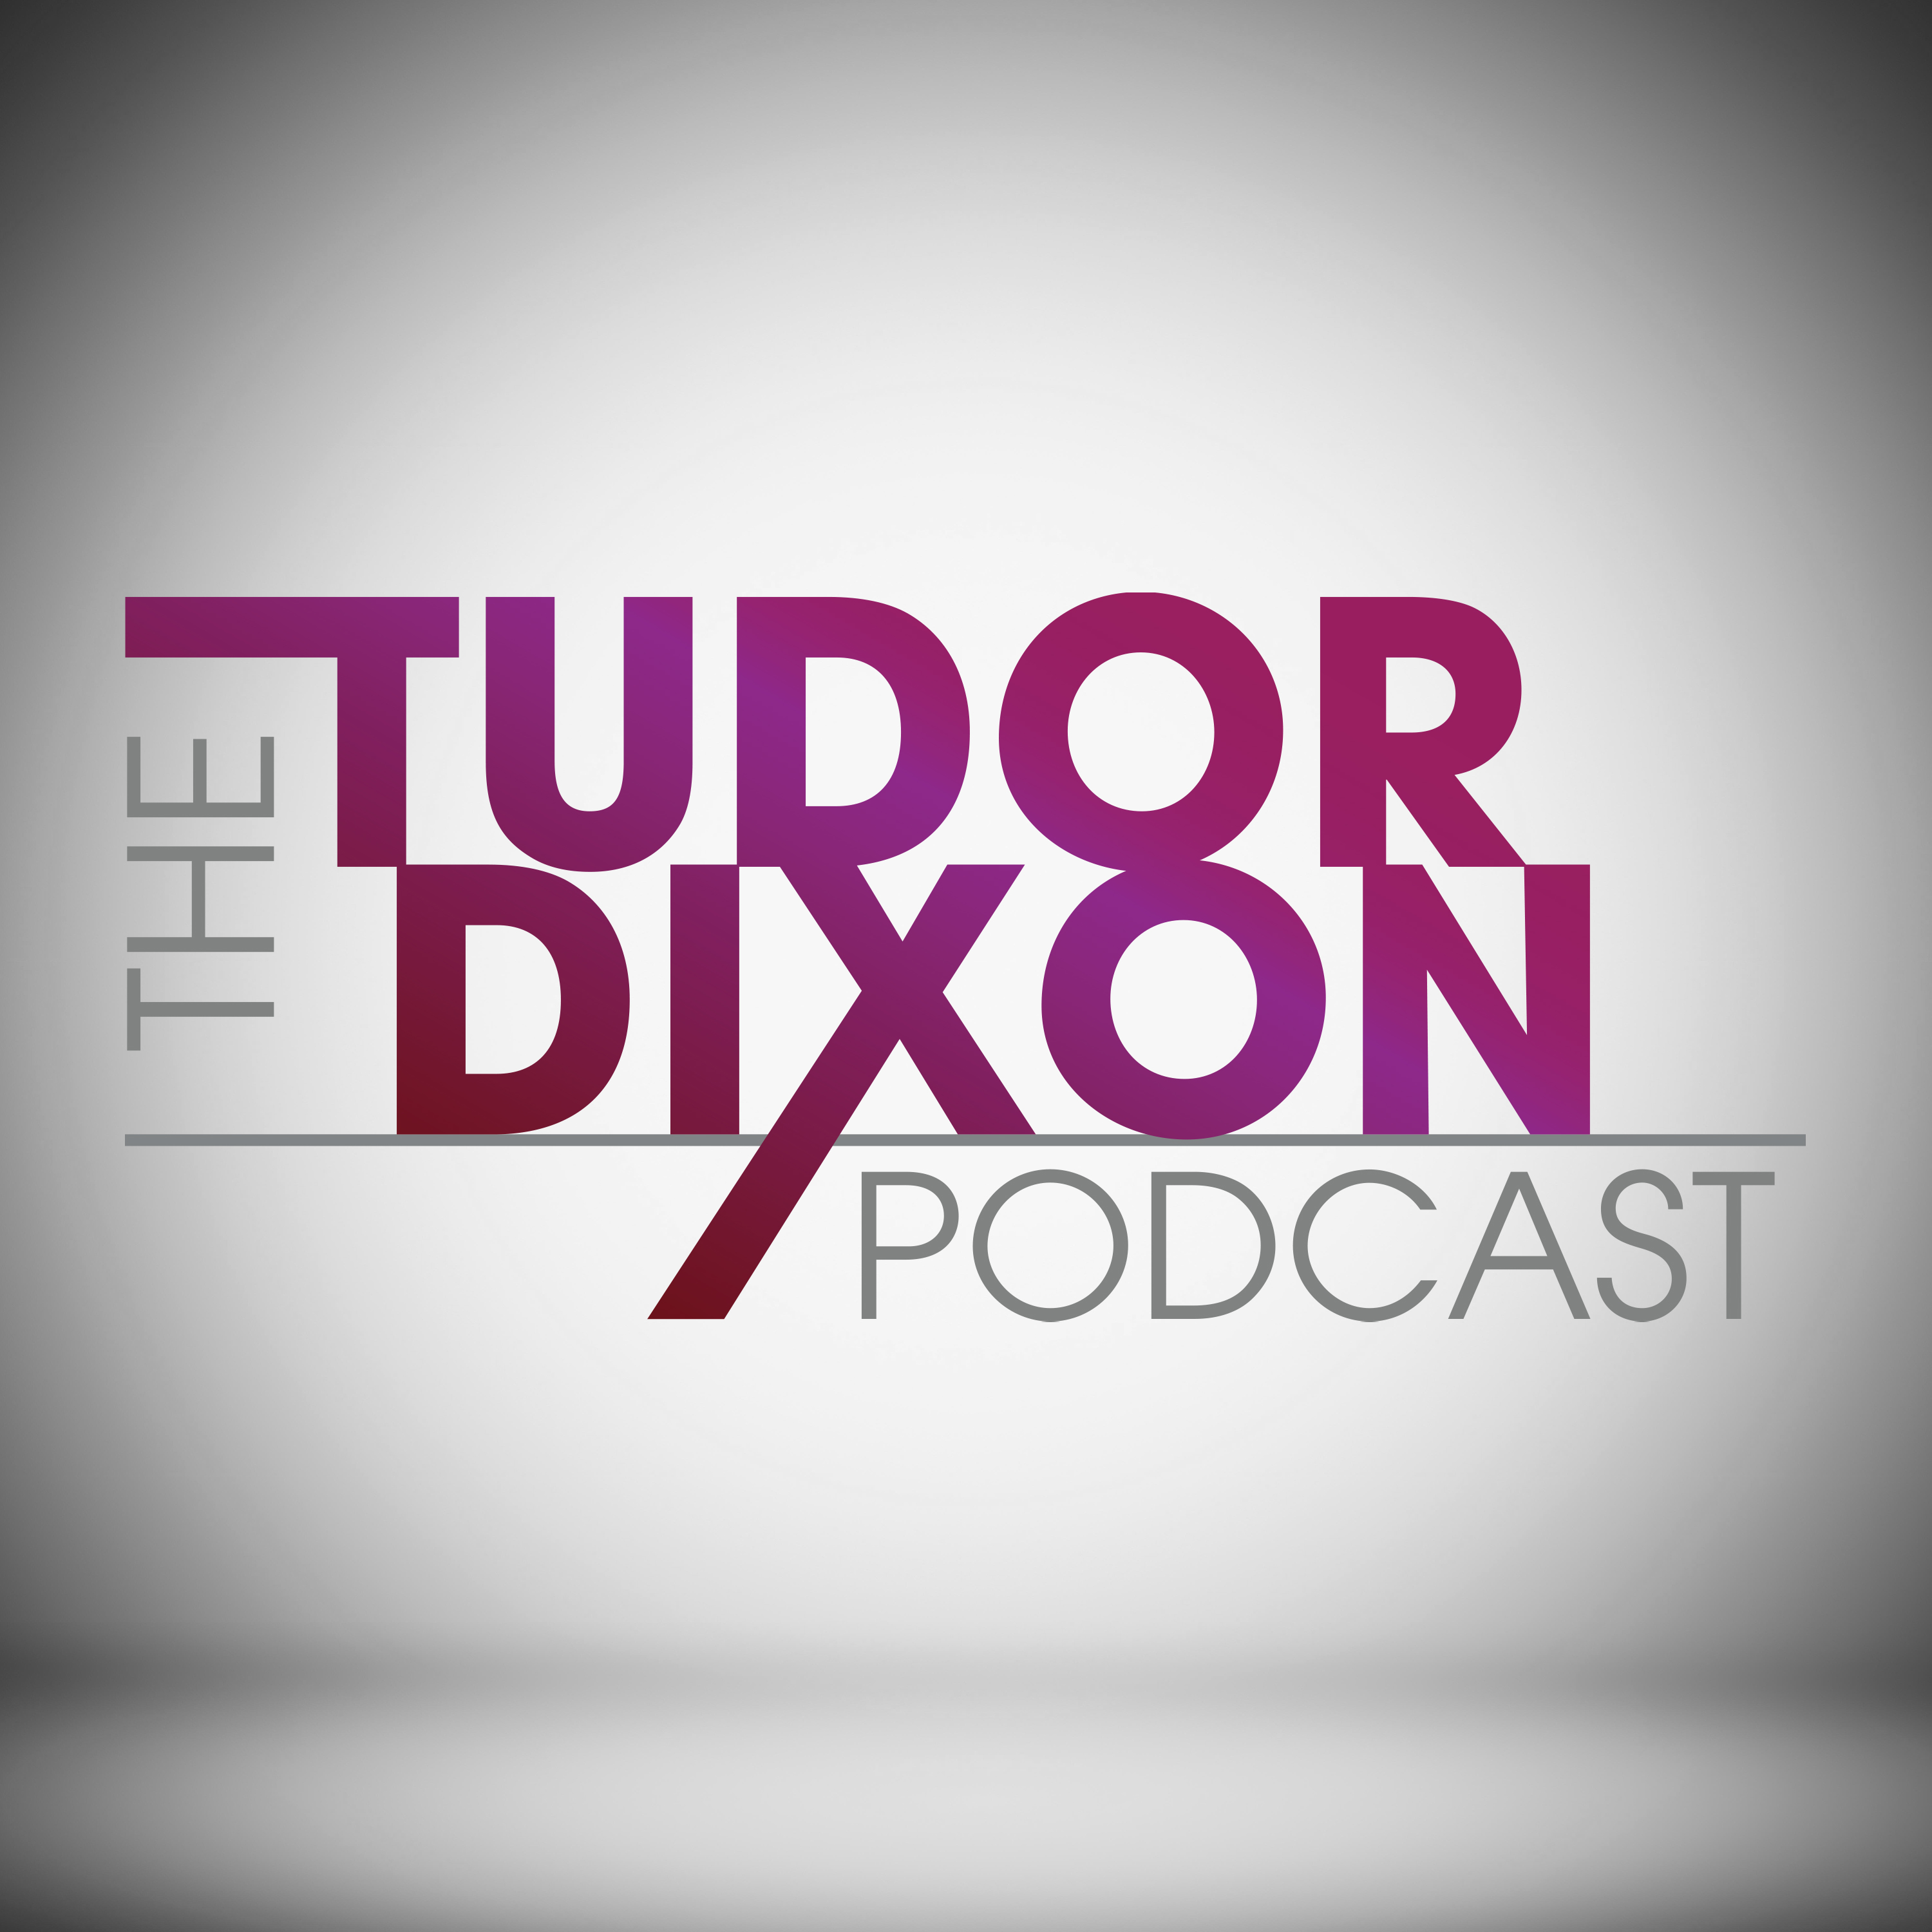 The Tudor Dixon Podcast: Defeating the Radical Left's Ideology